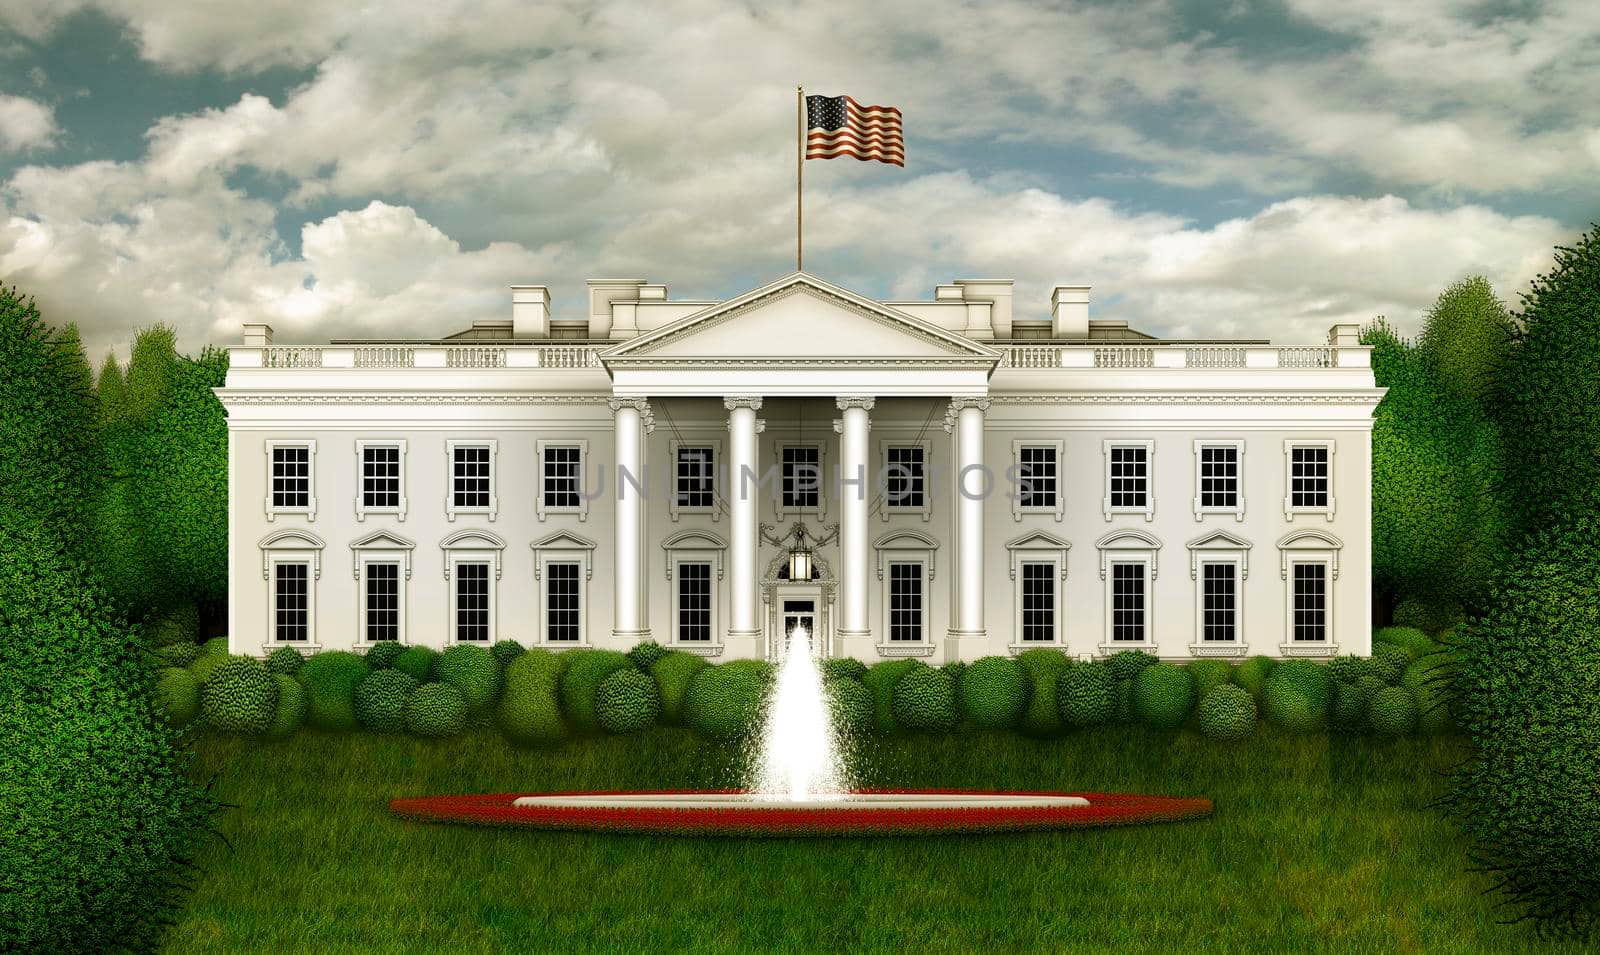 North view of the White House, including shrubs, trees, the south lawn, and fountain. 3D Illustration